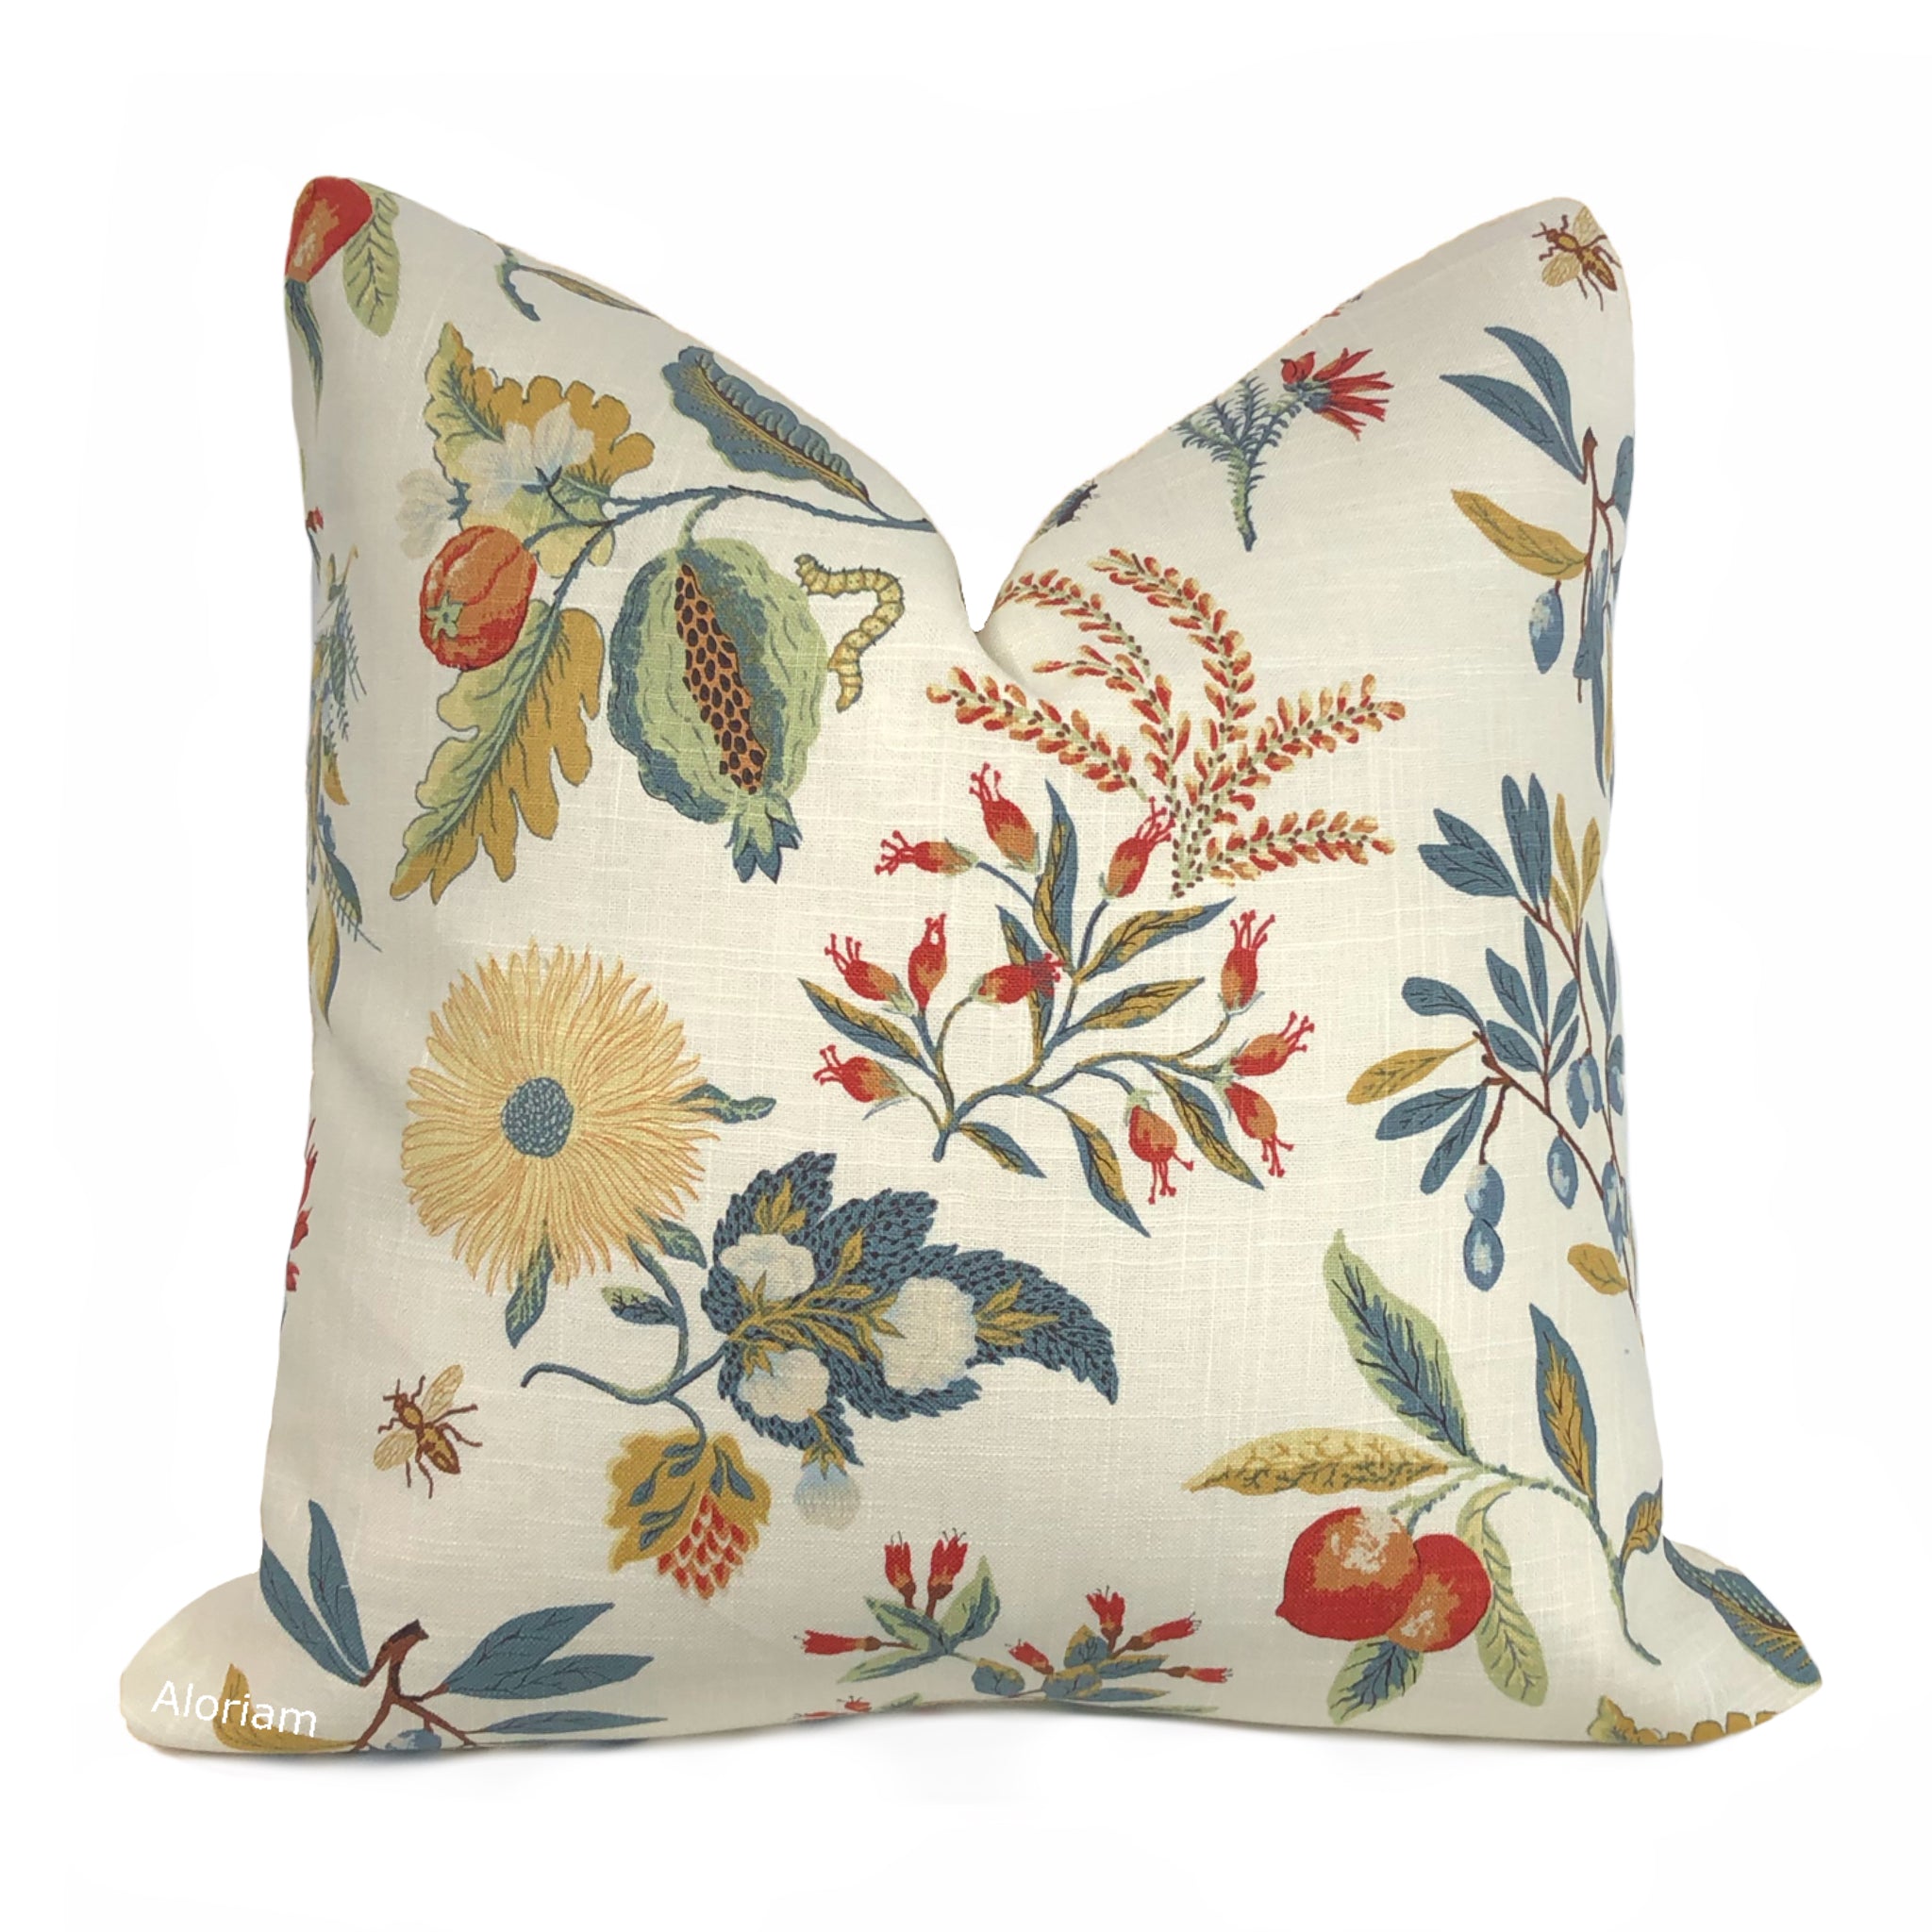 French General Fleur Botanical Pillow Cover (Fabric by the Yard available)